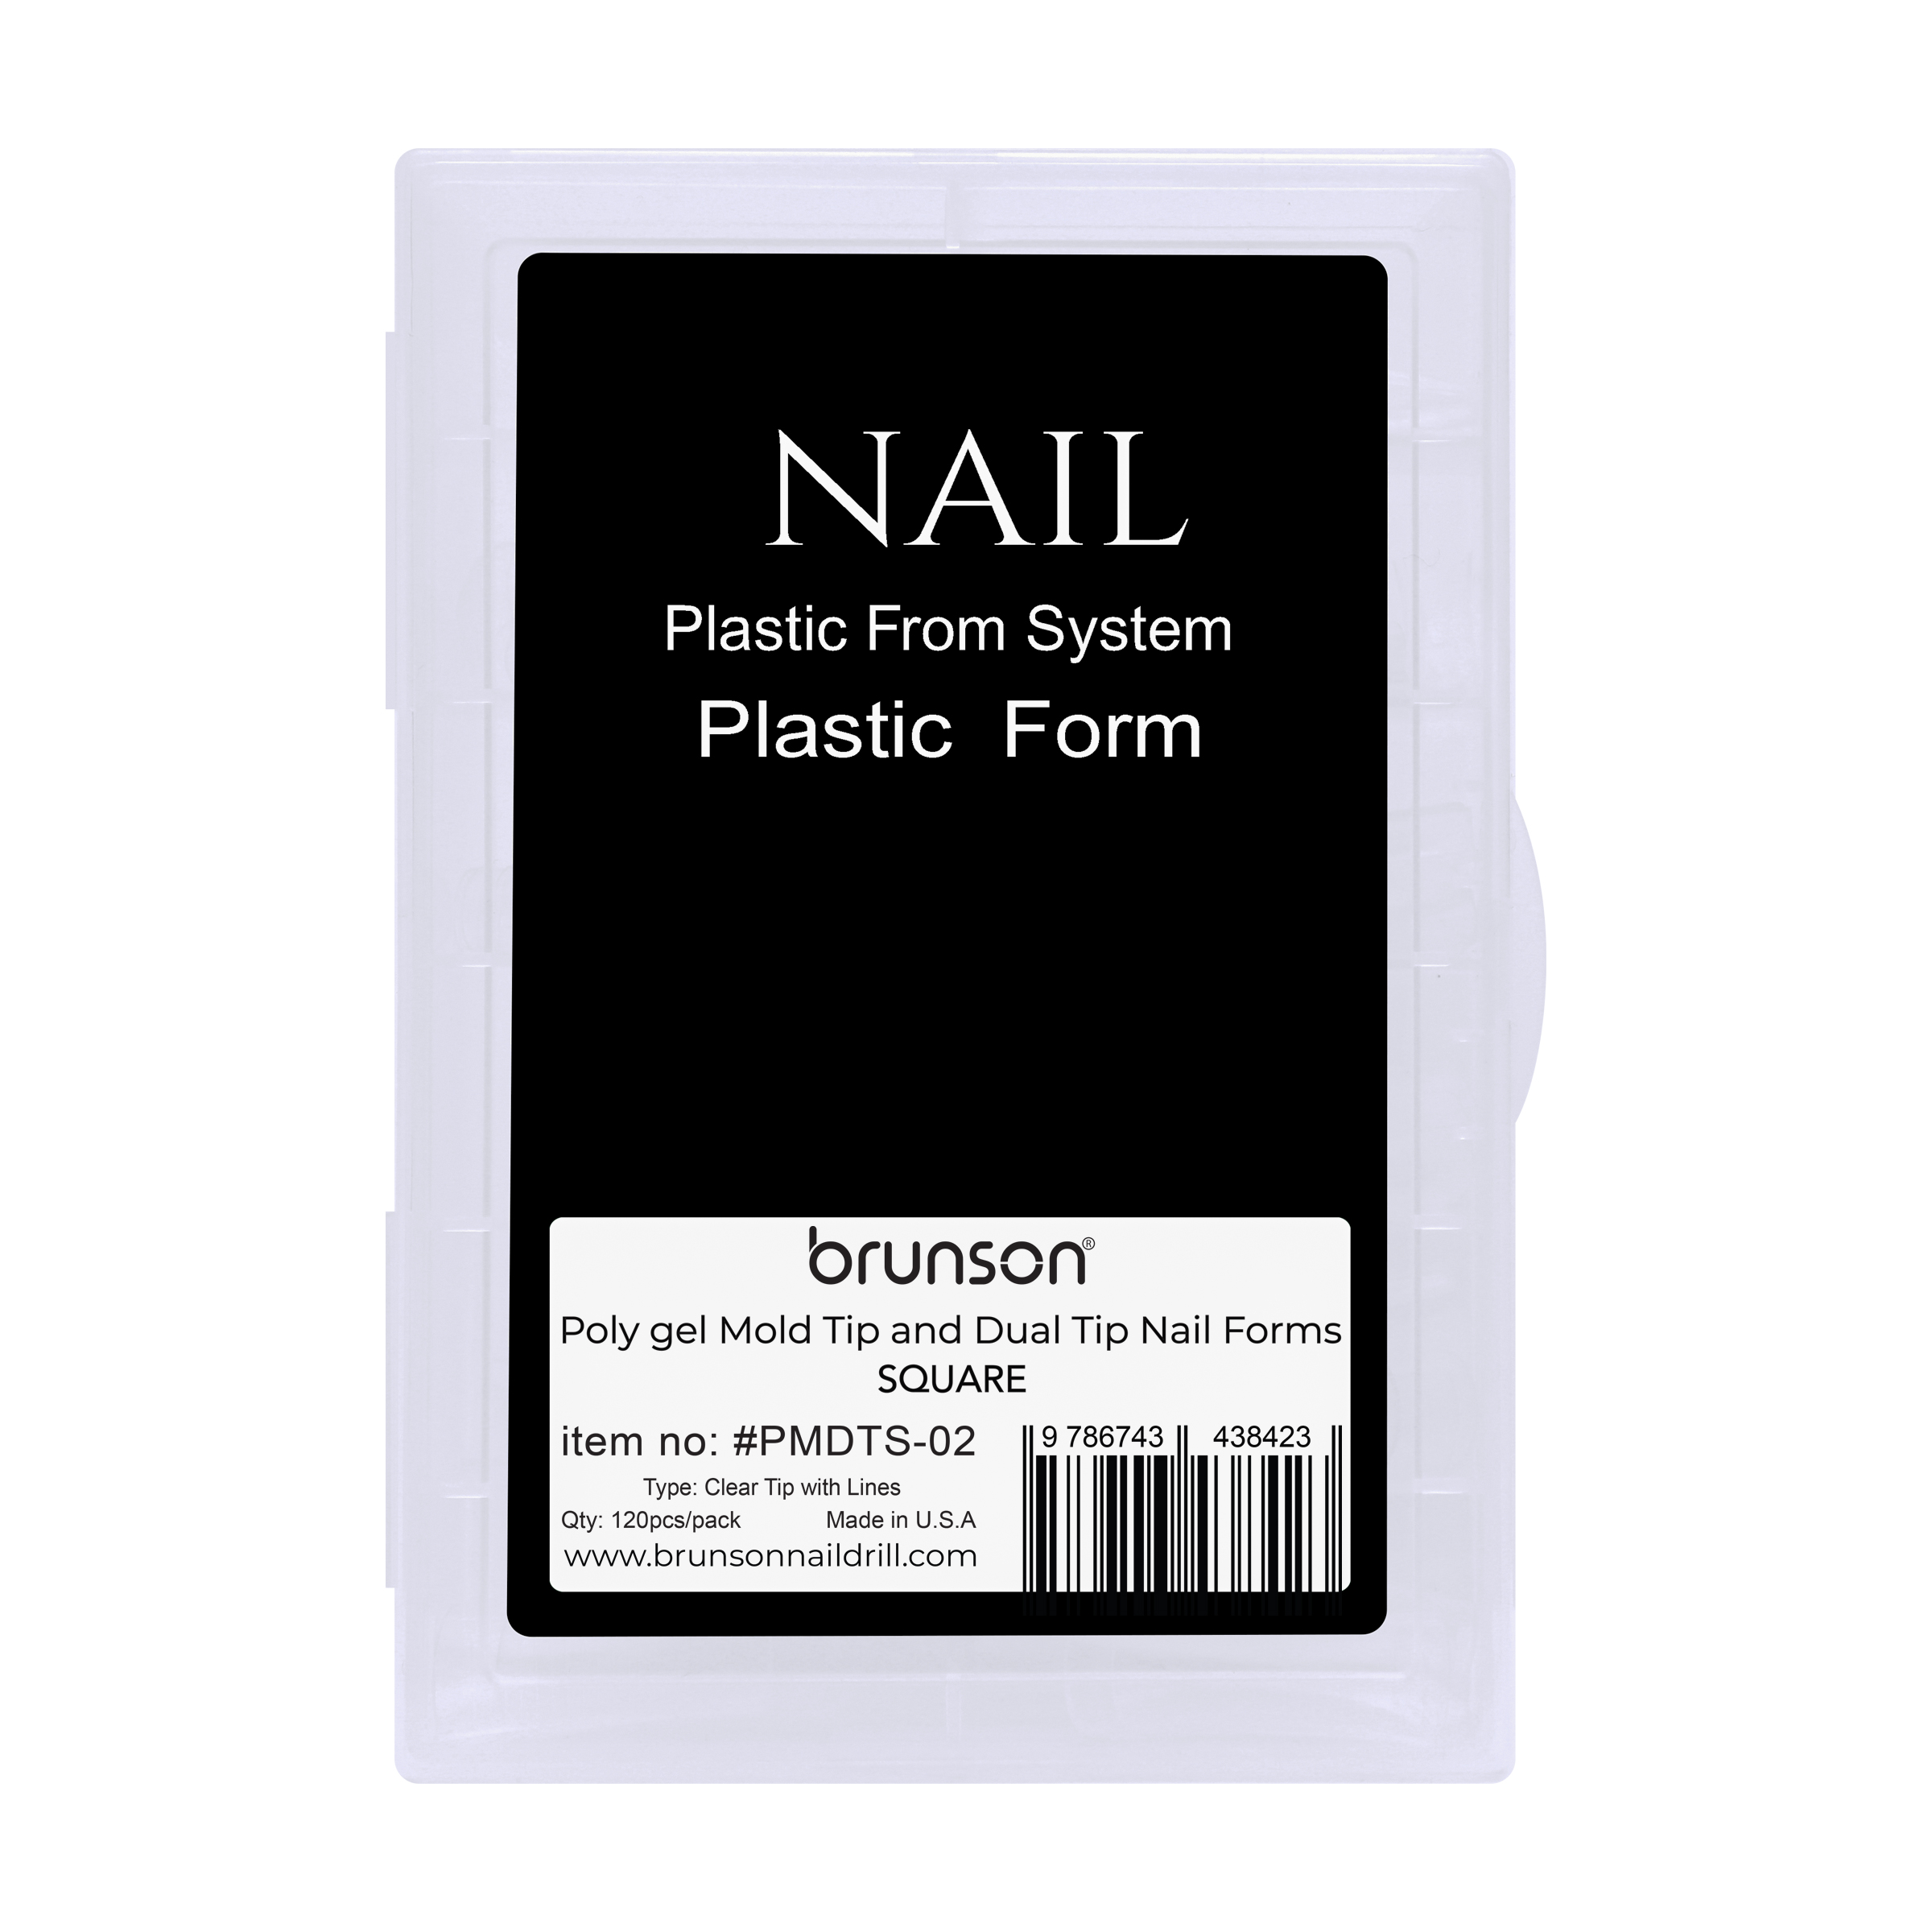 Poly Gel Mold Tip and Dual Tip Nail Forms PMDTS-02